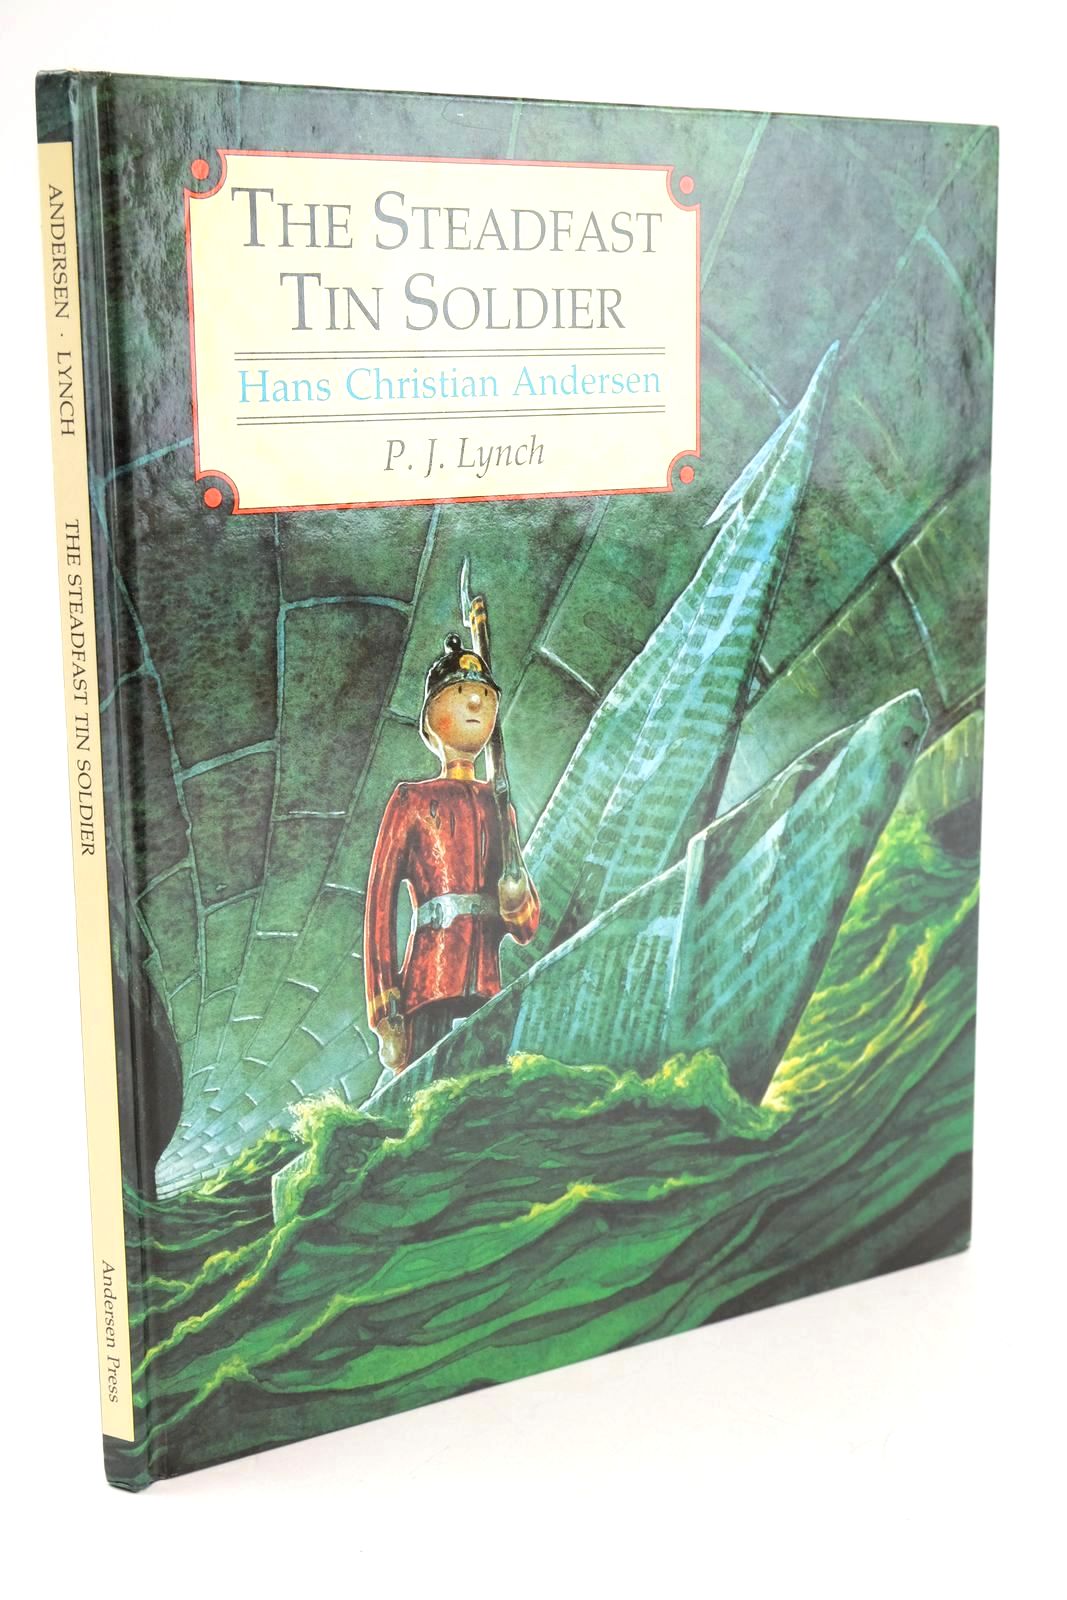 Photo of THE STEADFAST TIN SOLDIER written by Andersen, Hans Christian illustrated by Lynch, P.J. published by Andersen Press (STOCK CODE: 1325062)  for sale by Stella & Rose's Books